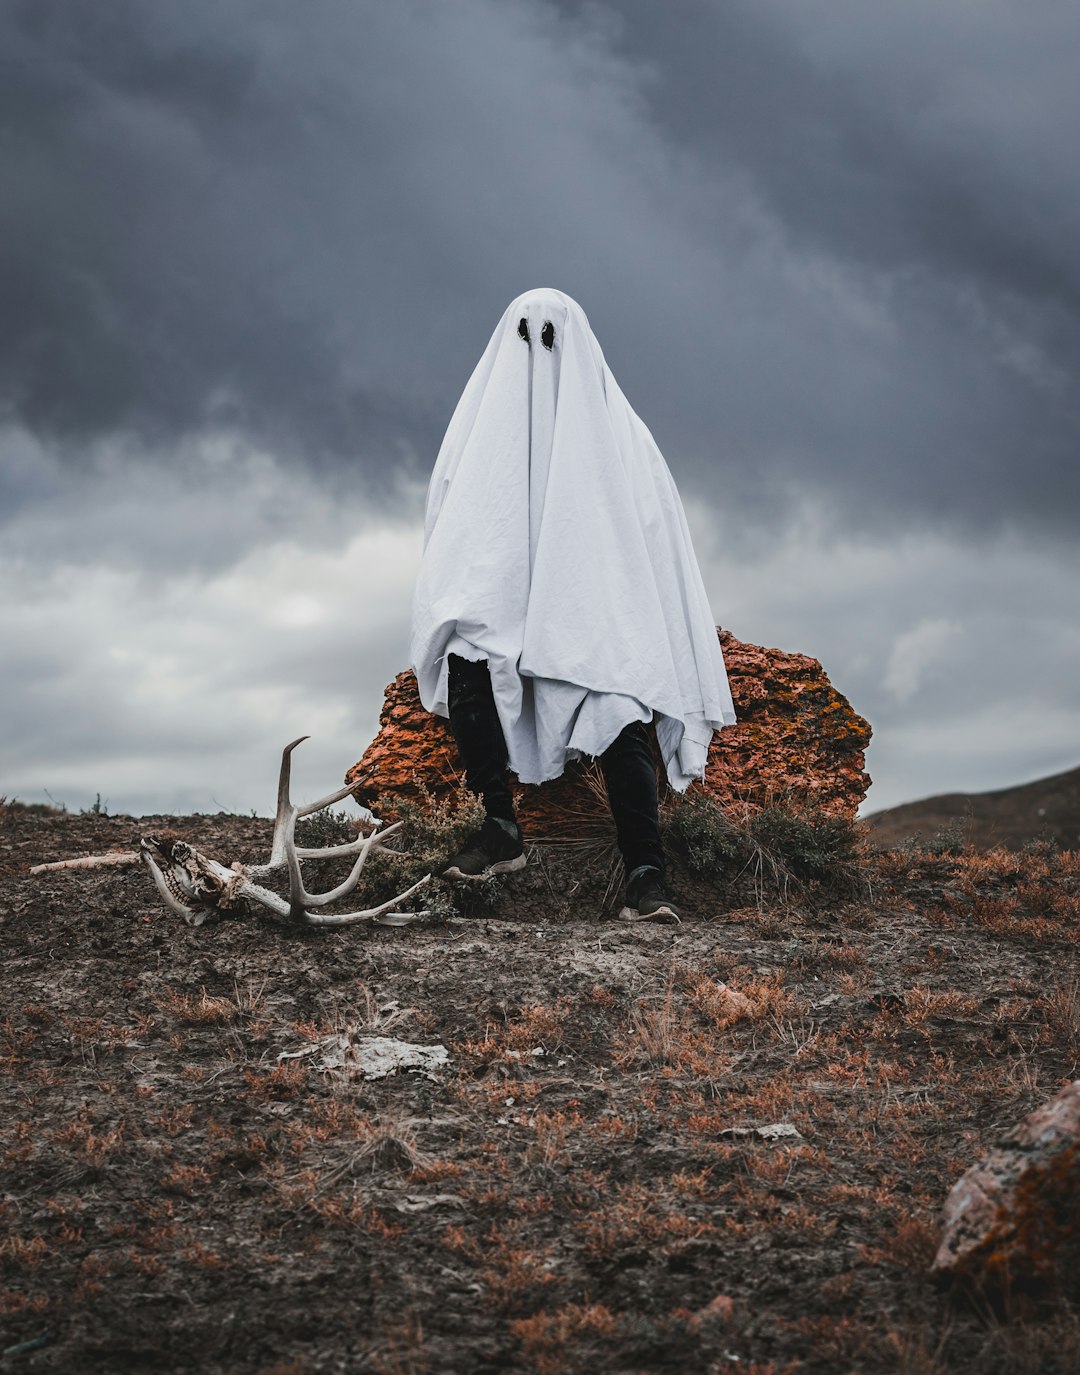 While exploring Saskatchewan's vast openness to take a ghost costume portrait, we found a deer skull and antlers near a boulder. We knew immediately that this was the shot we were looking for!
IG 👉@tandemxvisuals